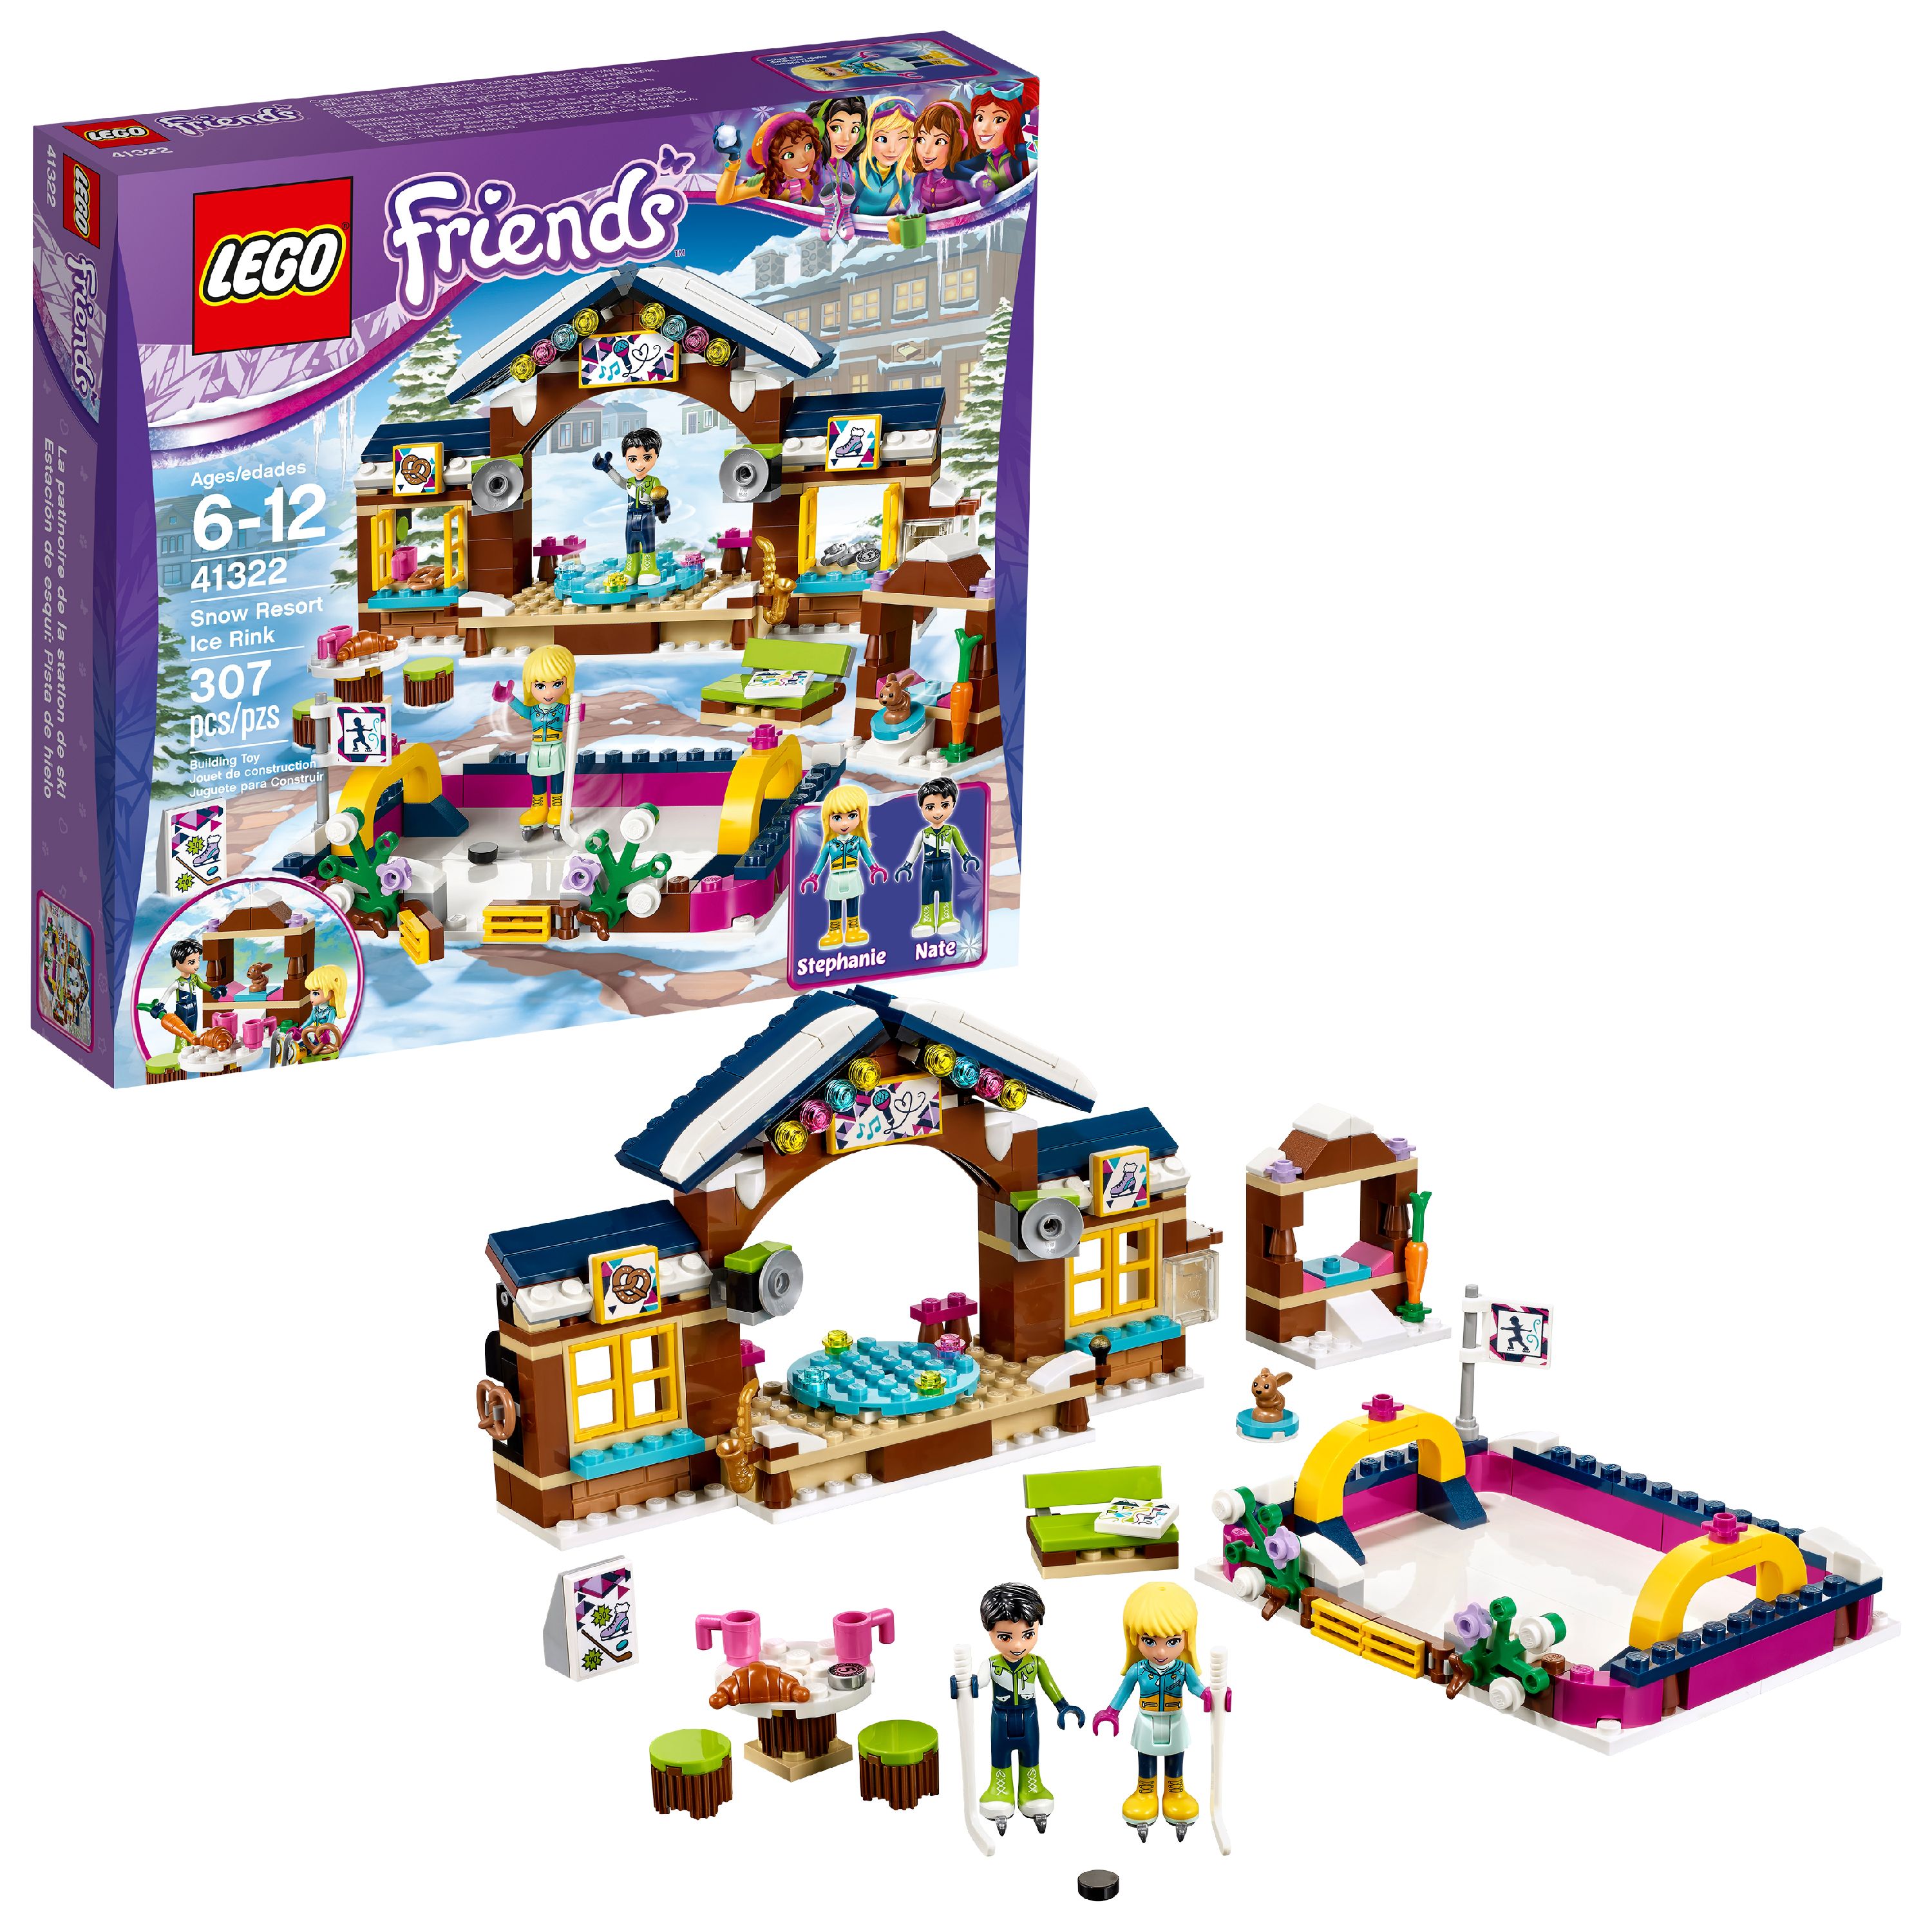 LEGO Friends Snow Resort Ice Rink 41322 (307 Pieces) - image 1 of 6